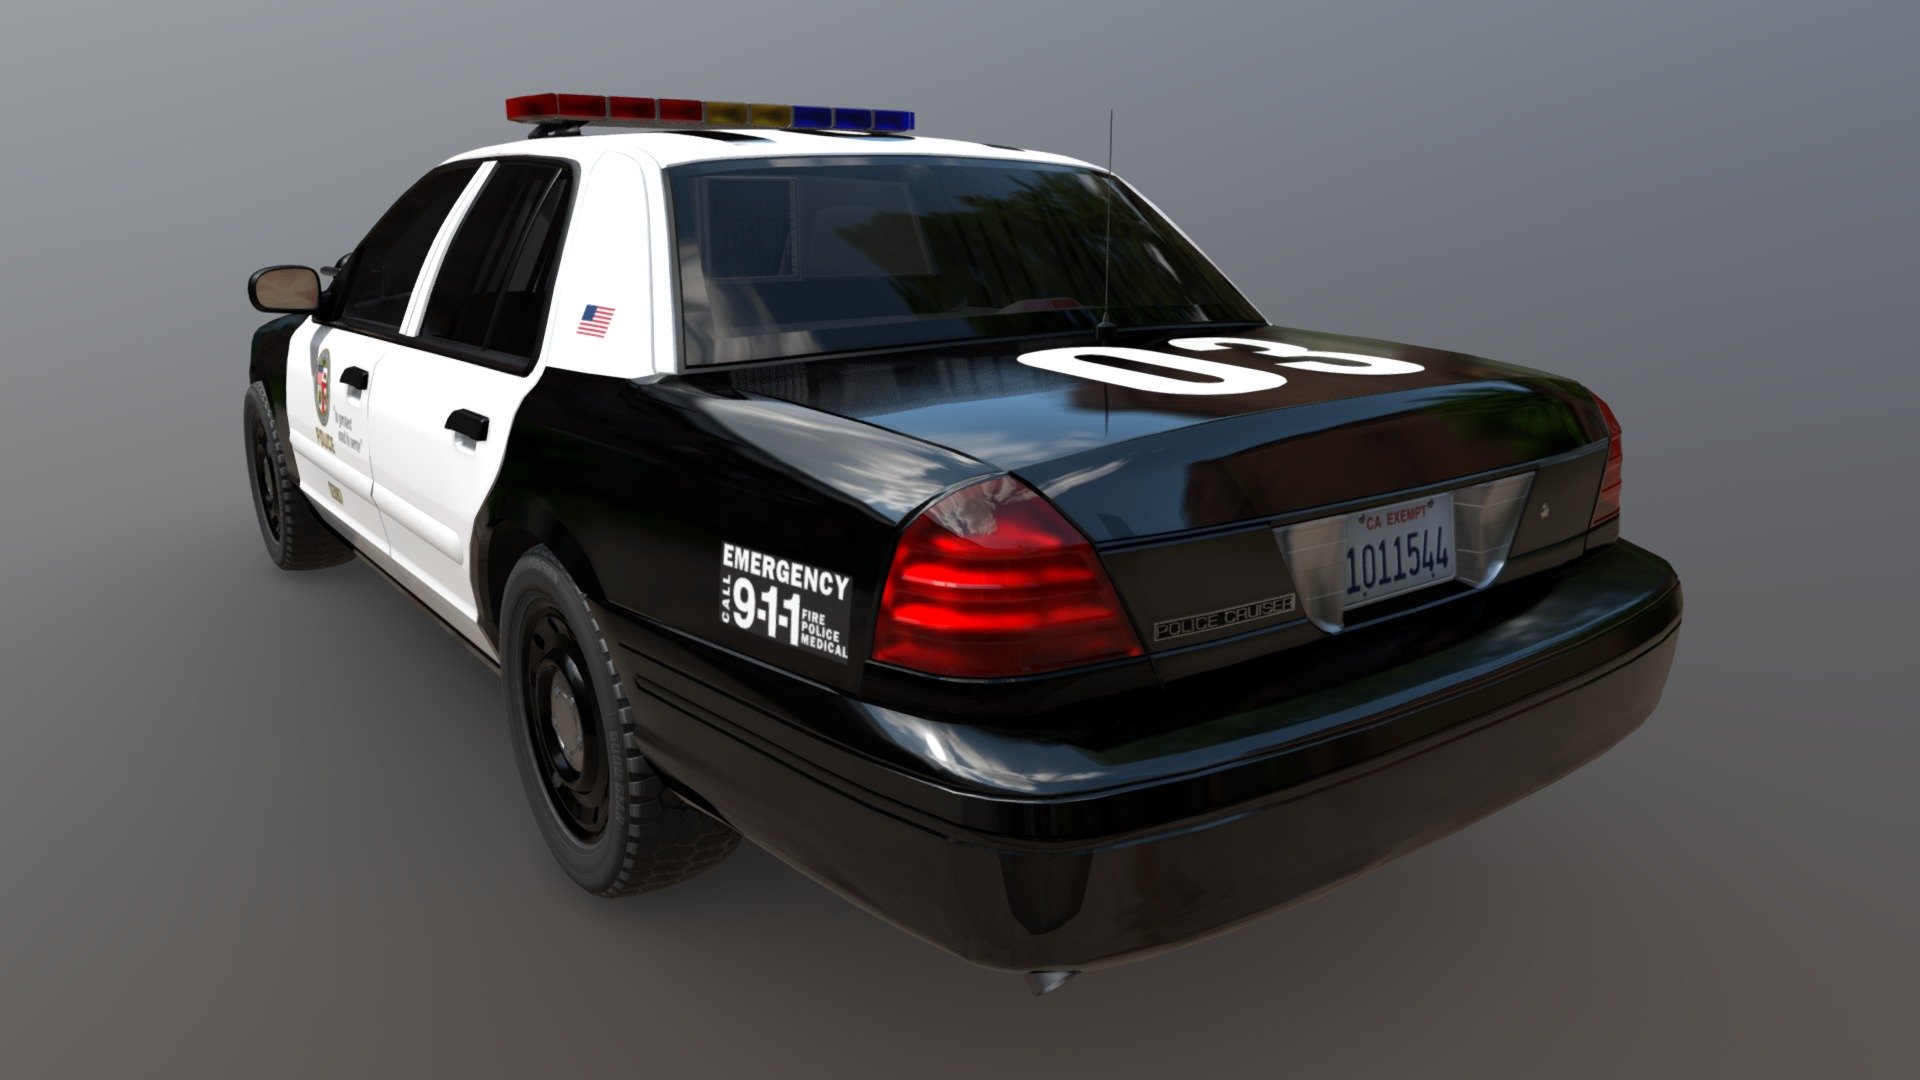 LAPD police cruiser for the video game Urban Terror 5 on Unreal Engine 4 http://www.urbanterror.info - Police Cruiser - 3D model by joemauke 3d model